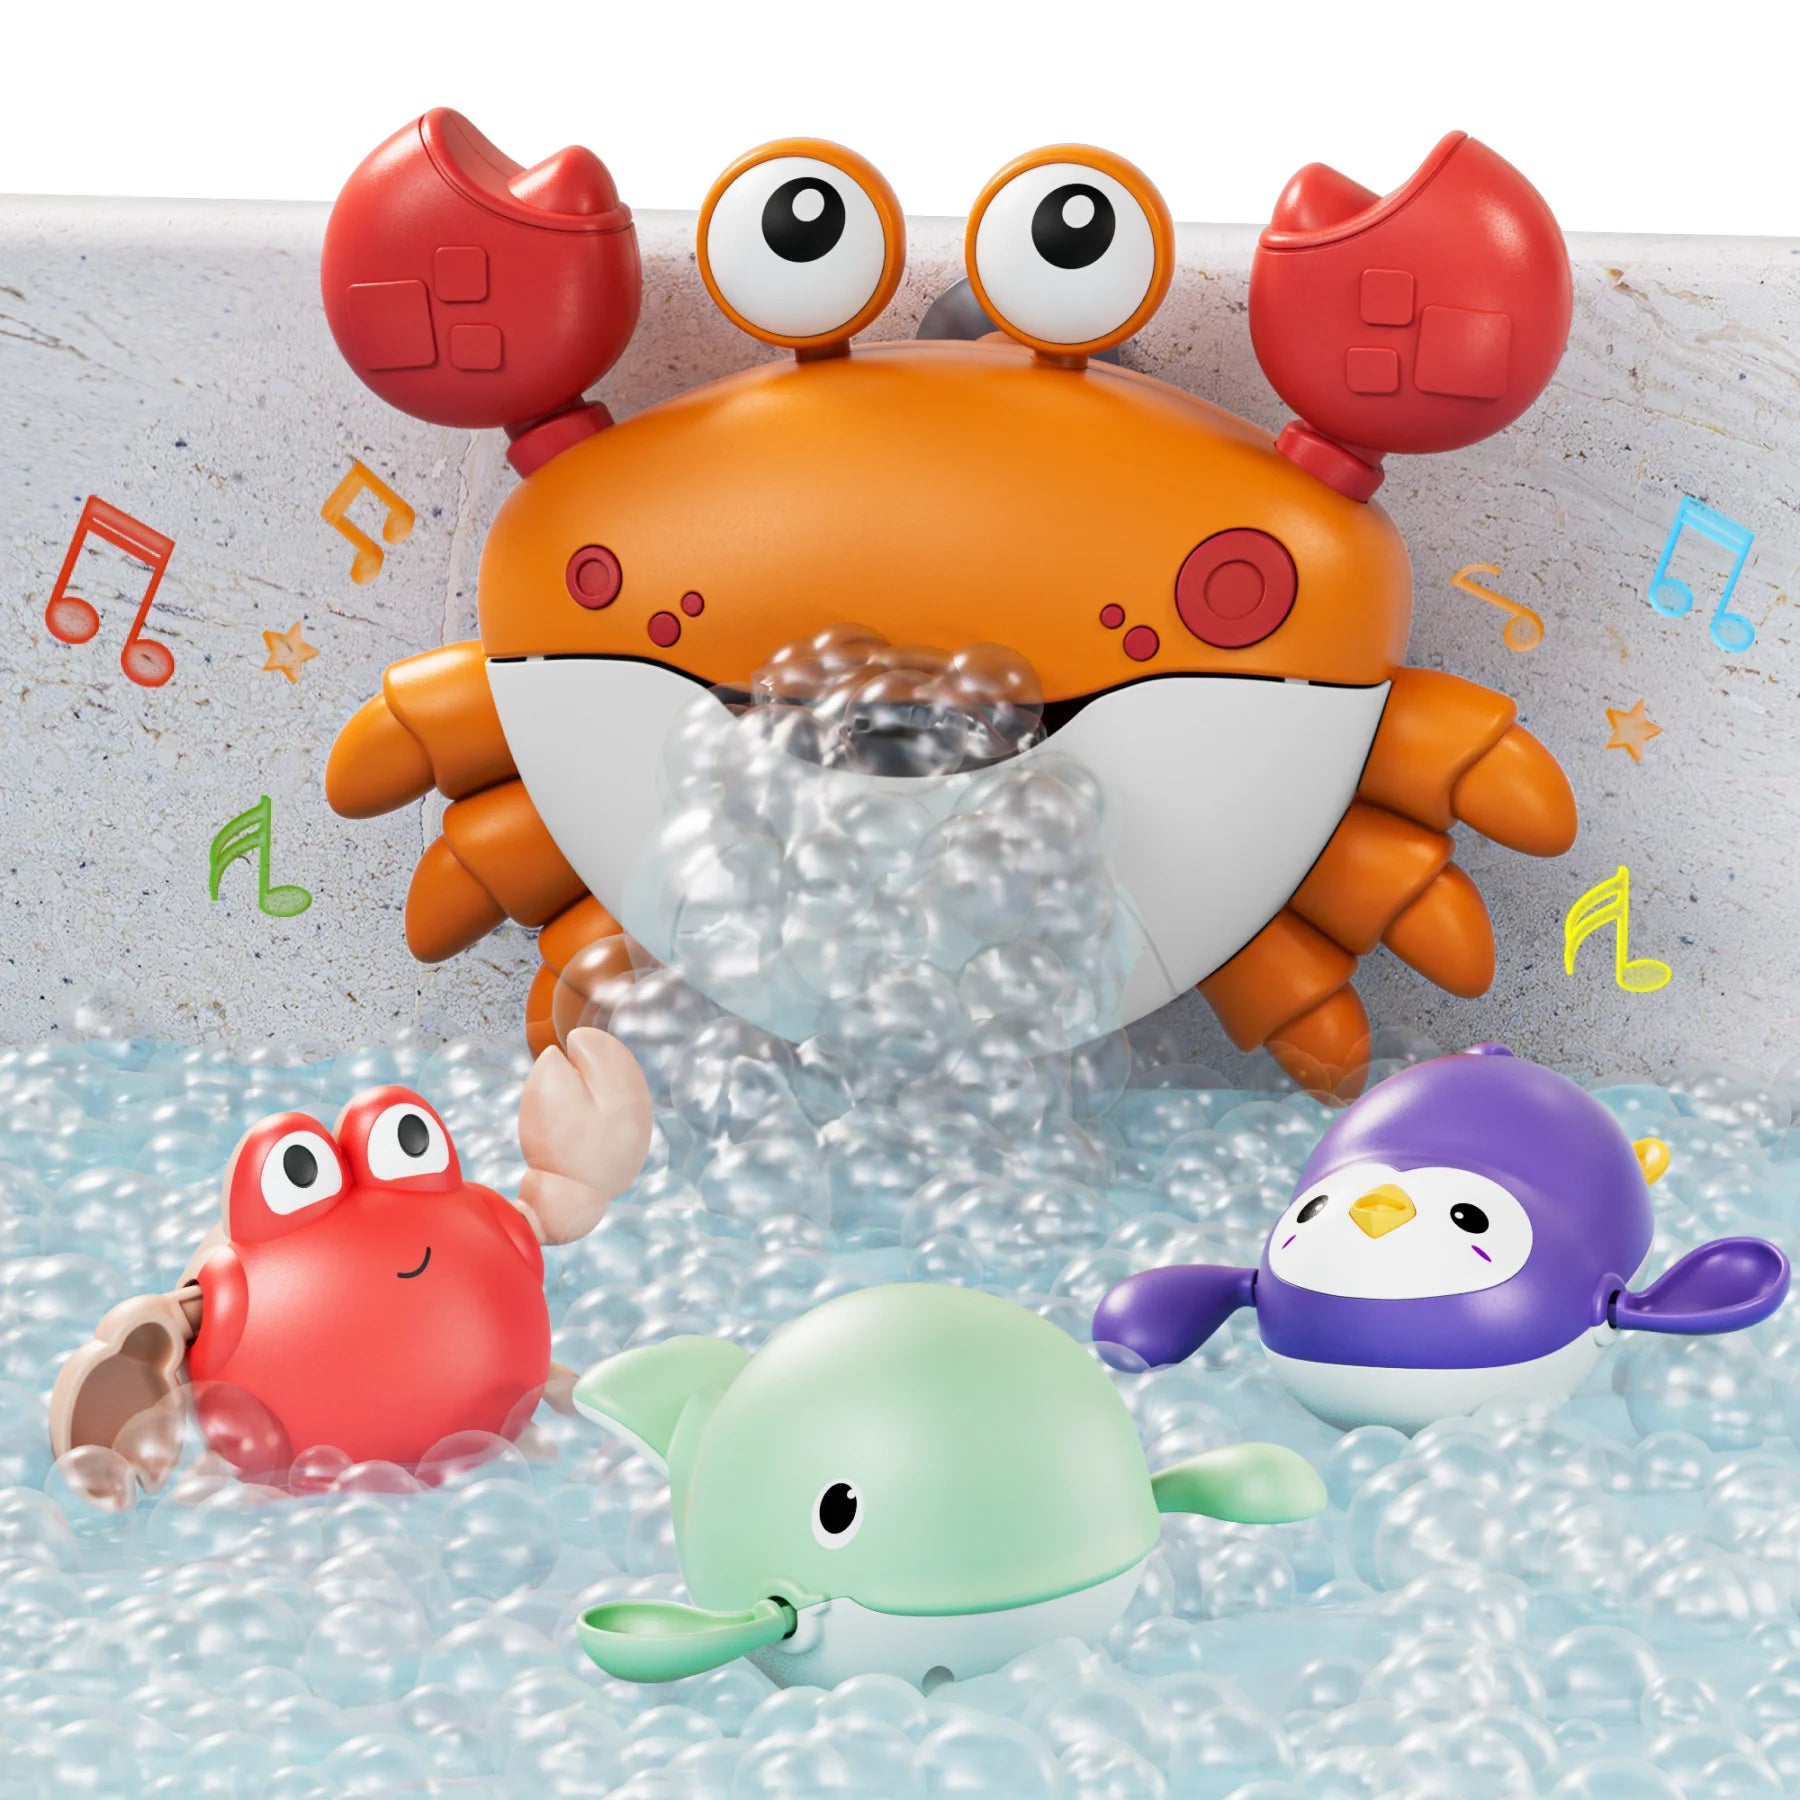 Bath toy crab bath bubble maker with 3 wind-up swimming toys, bathtub automatic bubble machine for toddler kids 18 Months+